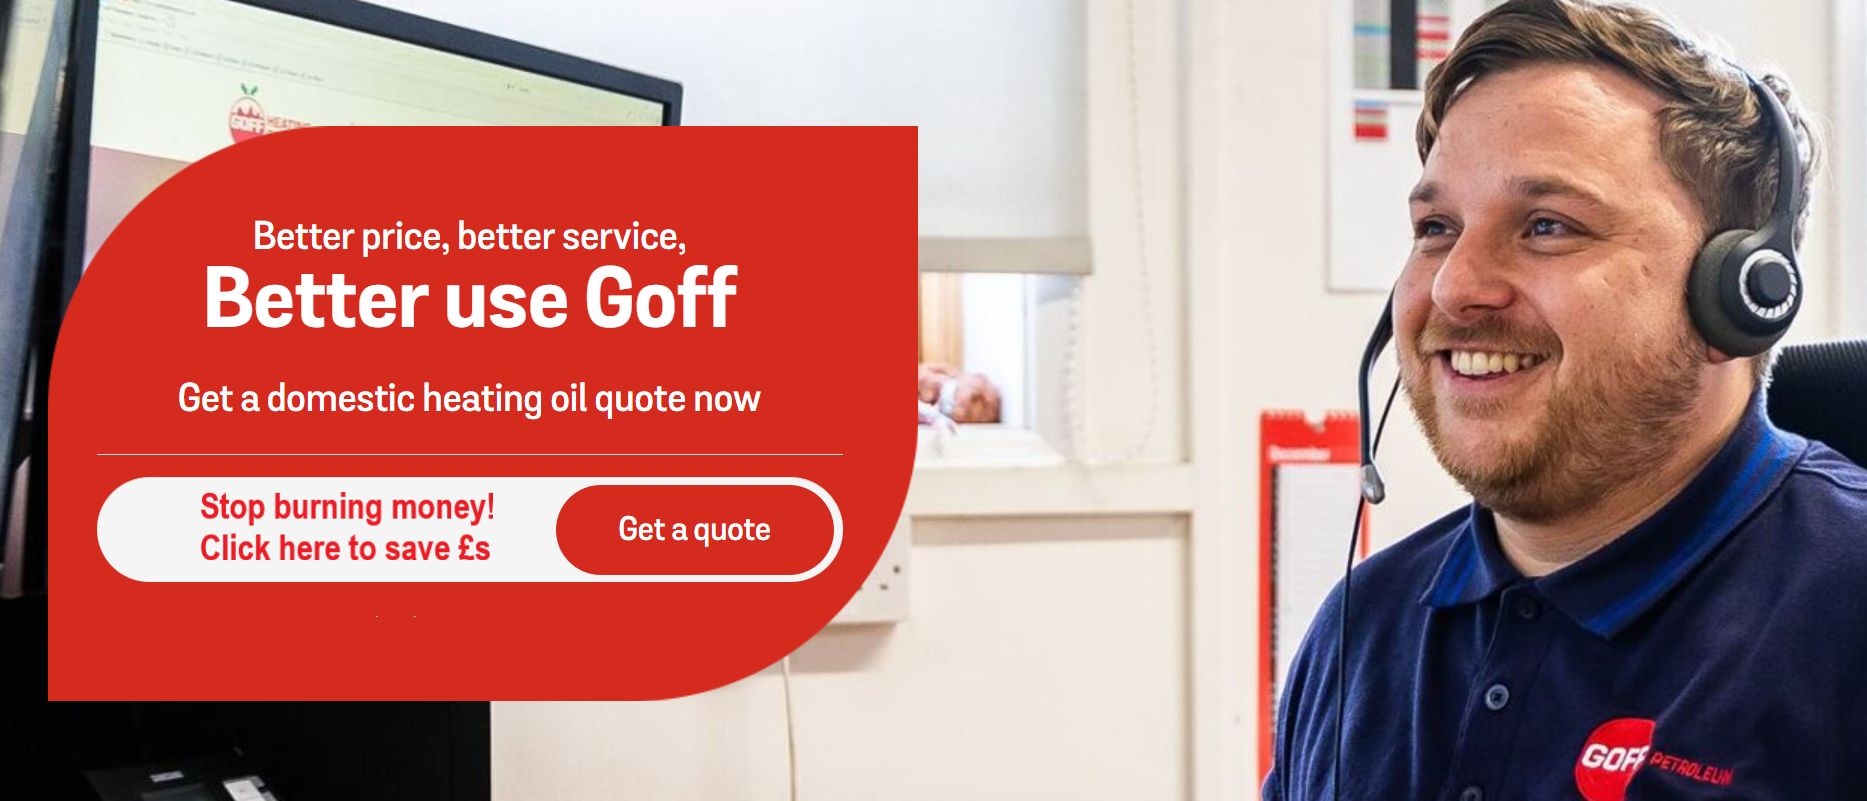 Stop Burning Money. Click here to save £s with Goff heating oil